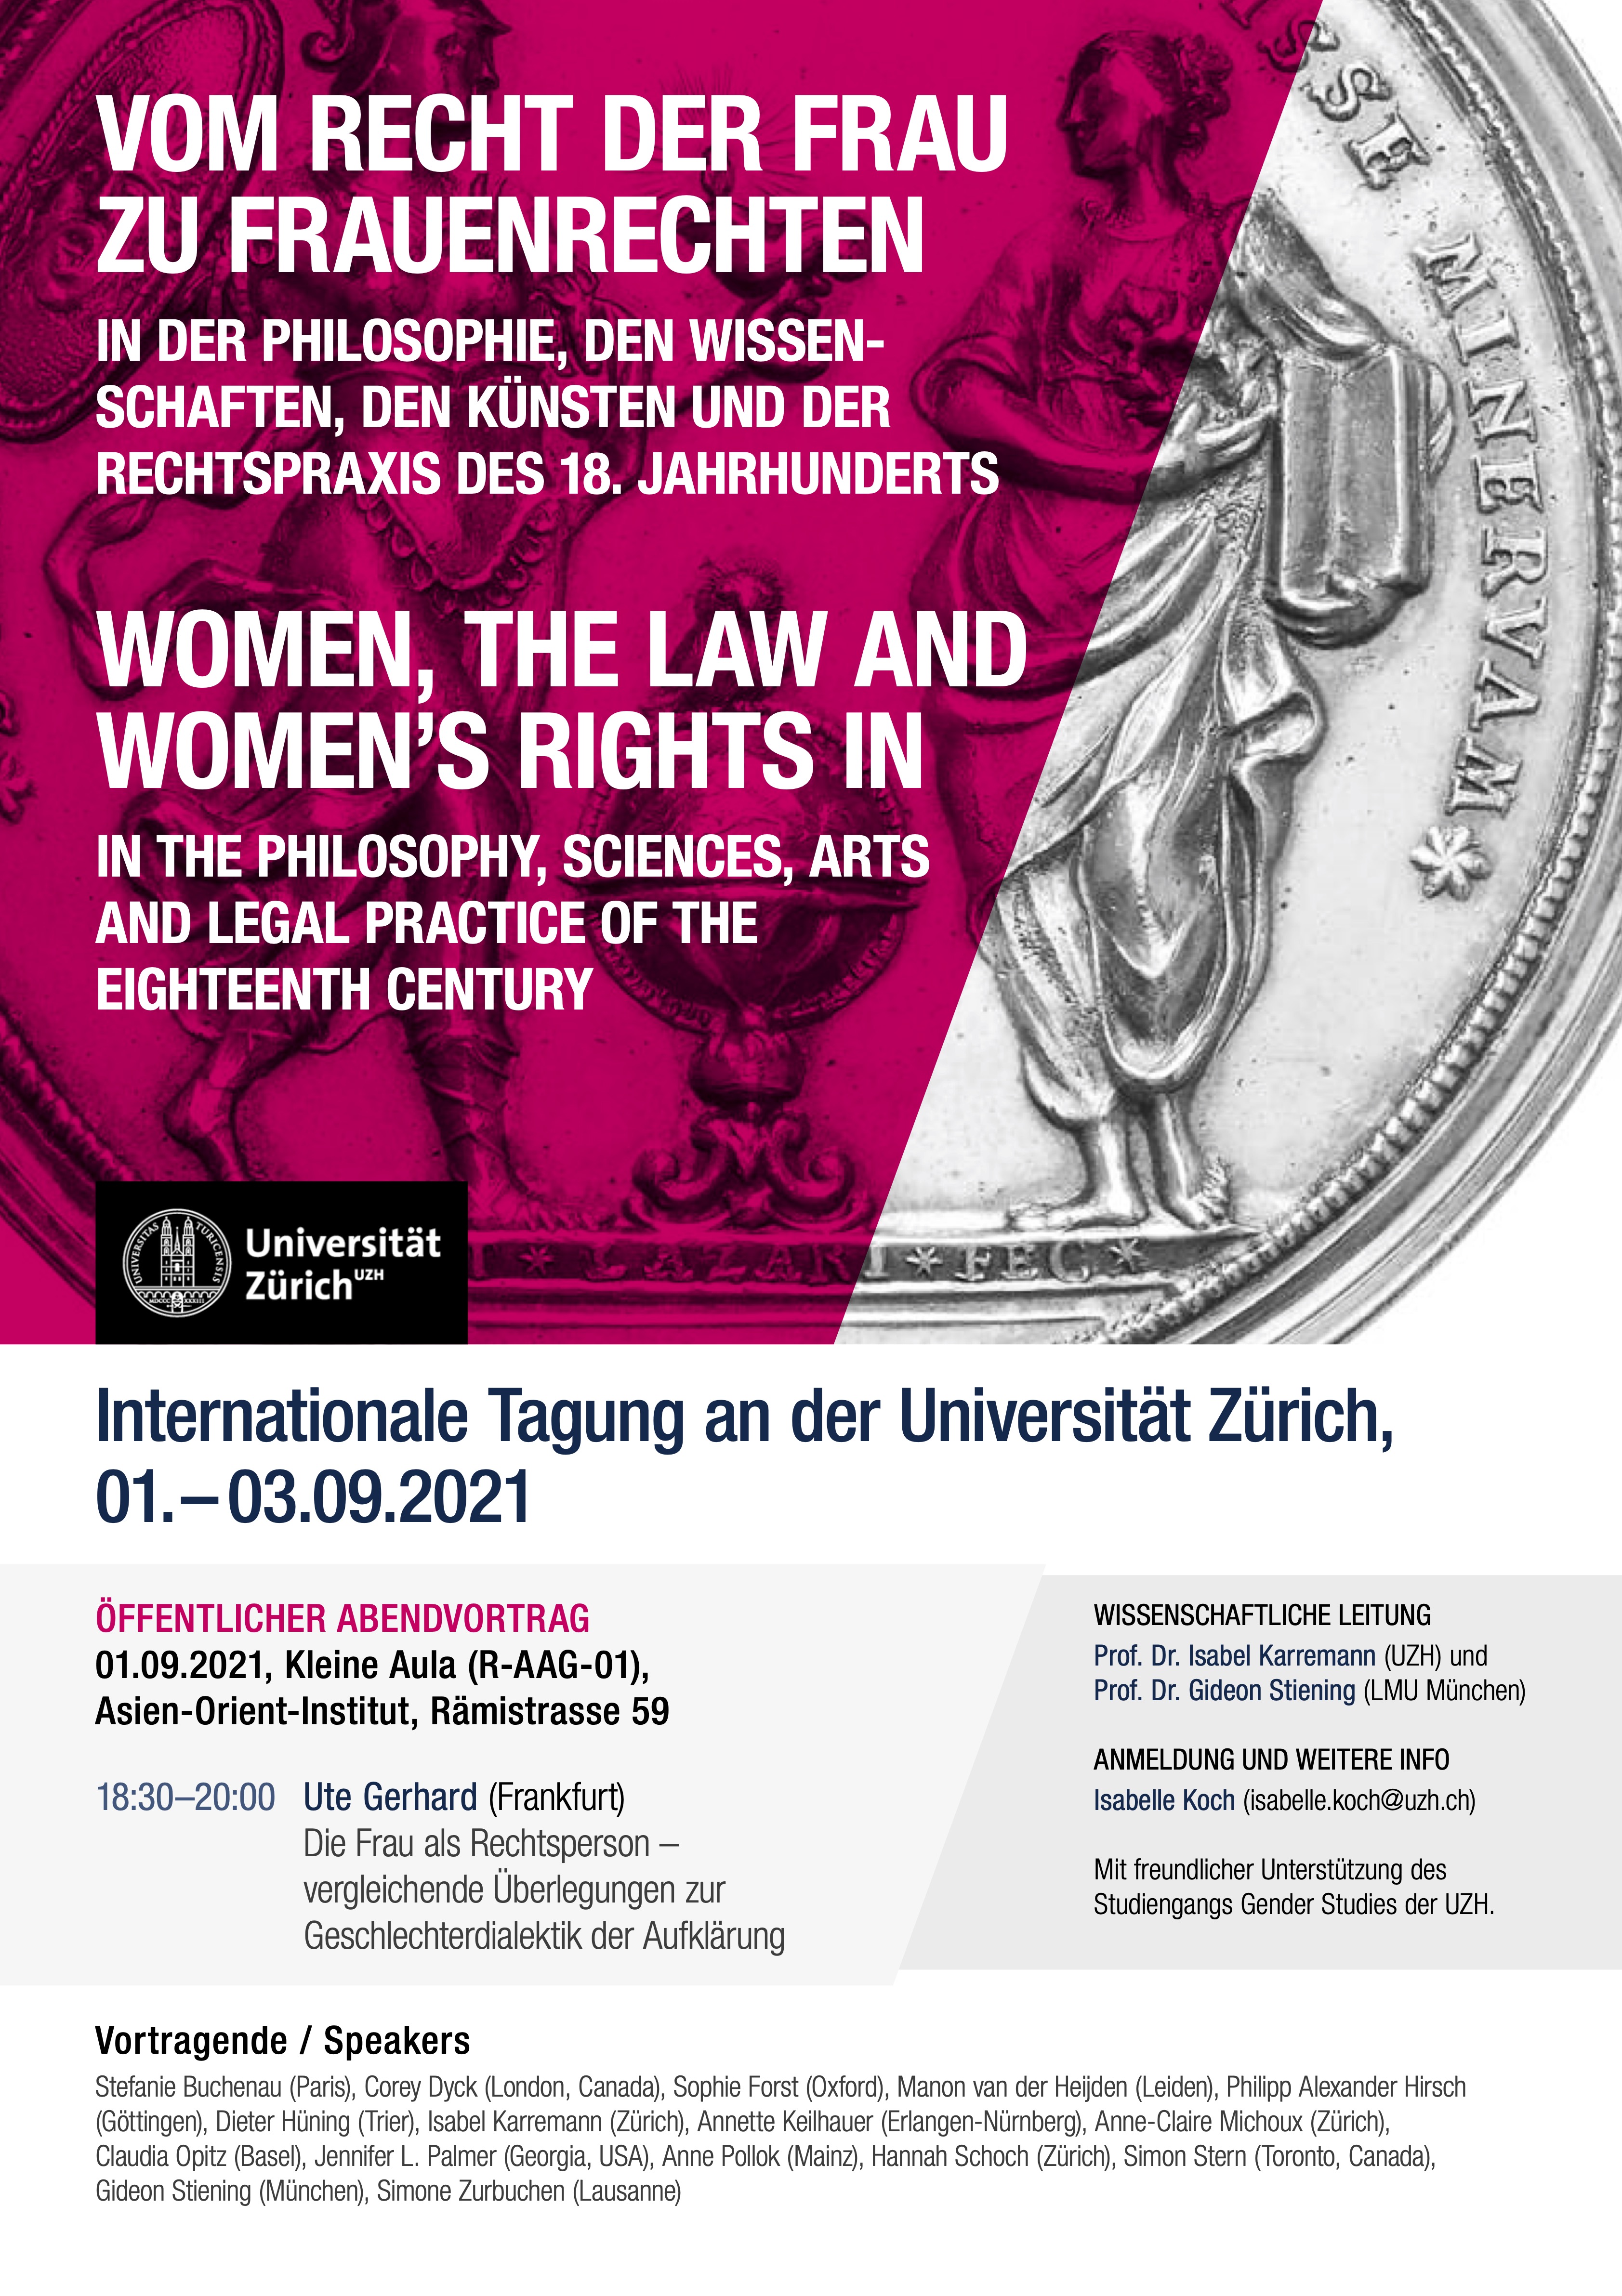 Women, the Law and Women’s Rights in the Philosophy, Sciences, Arts and Legal Practice of the Eighteenth Century